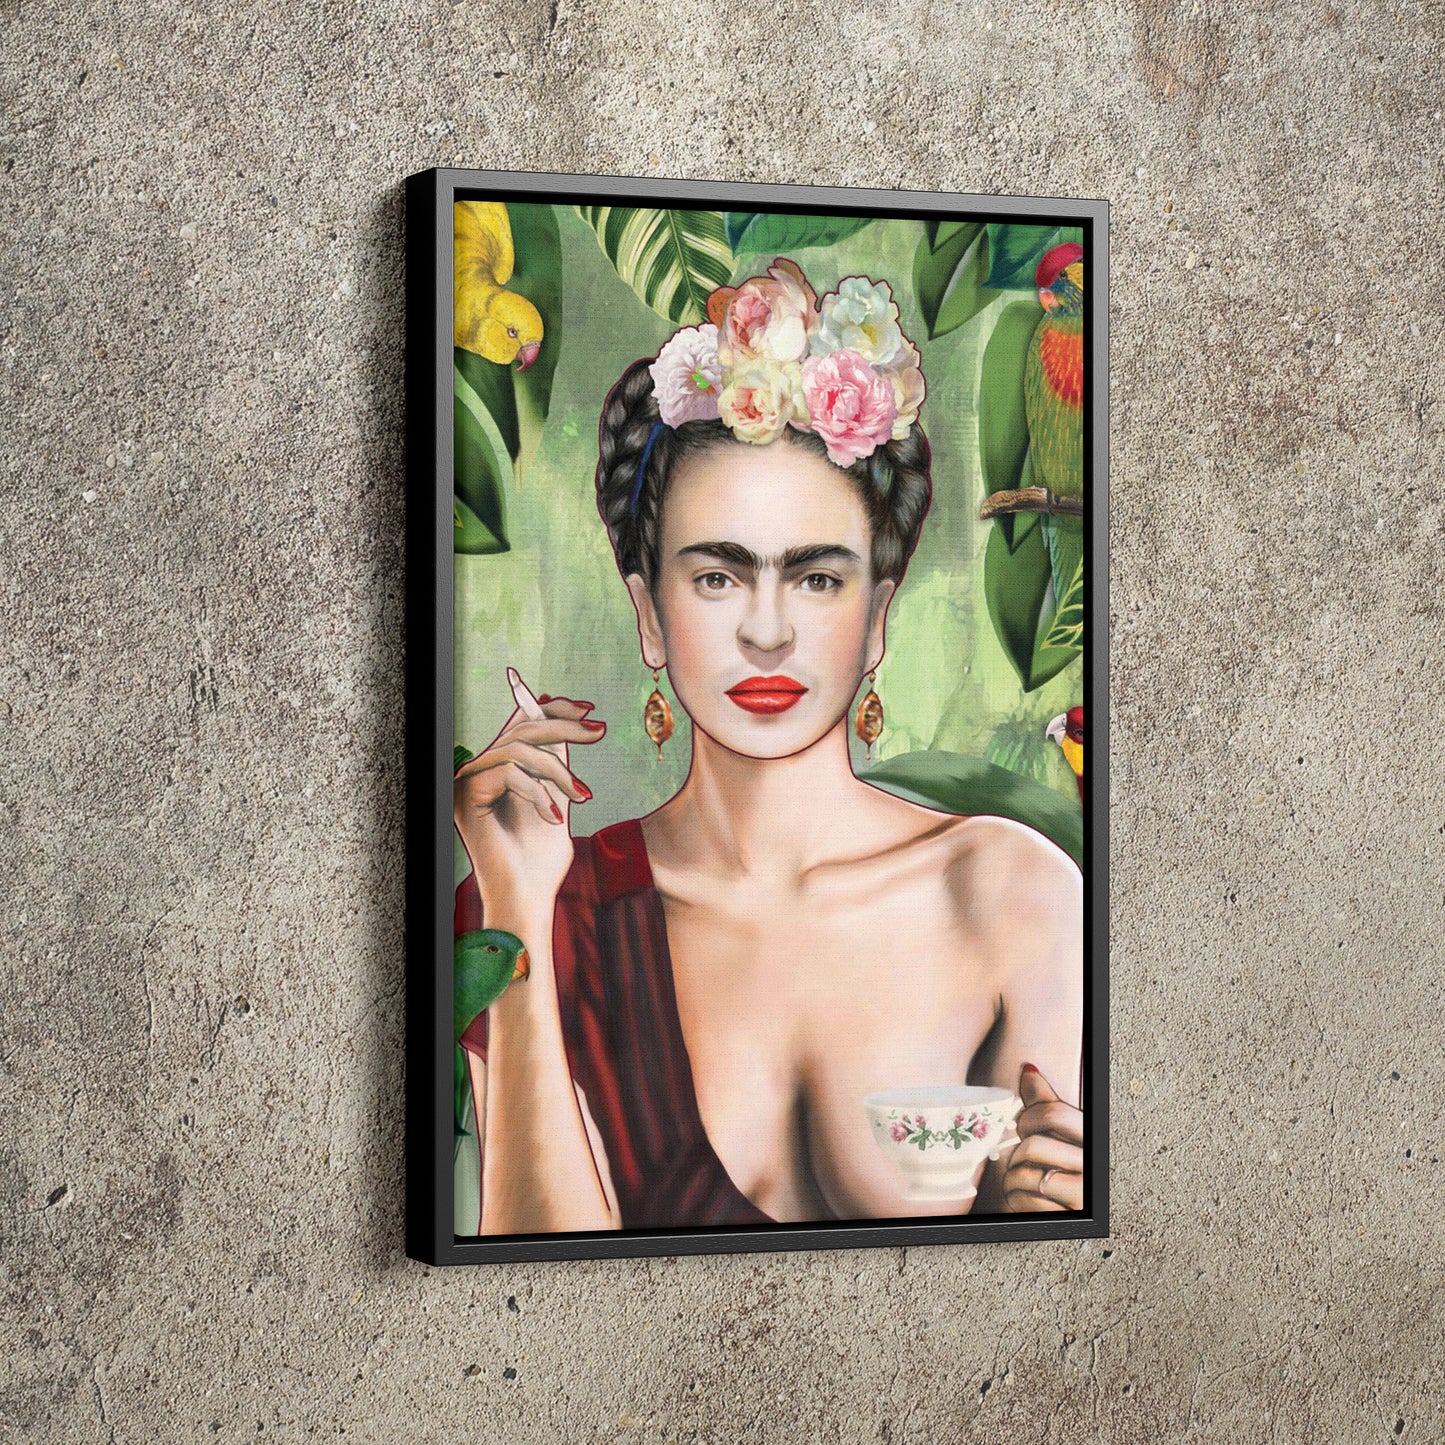 Frida Kahlo Painting Poster Painter Hand Made Posters Canvas Print Wall Art Home Decor